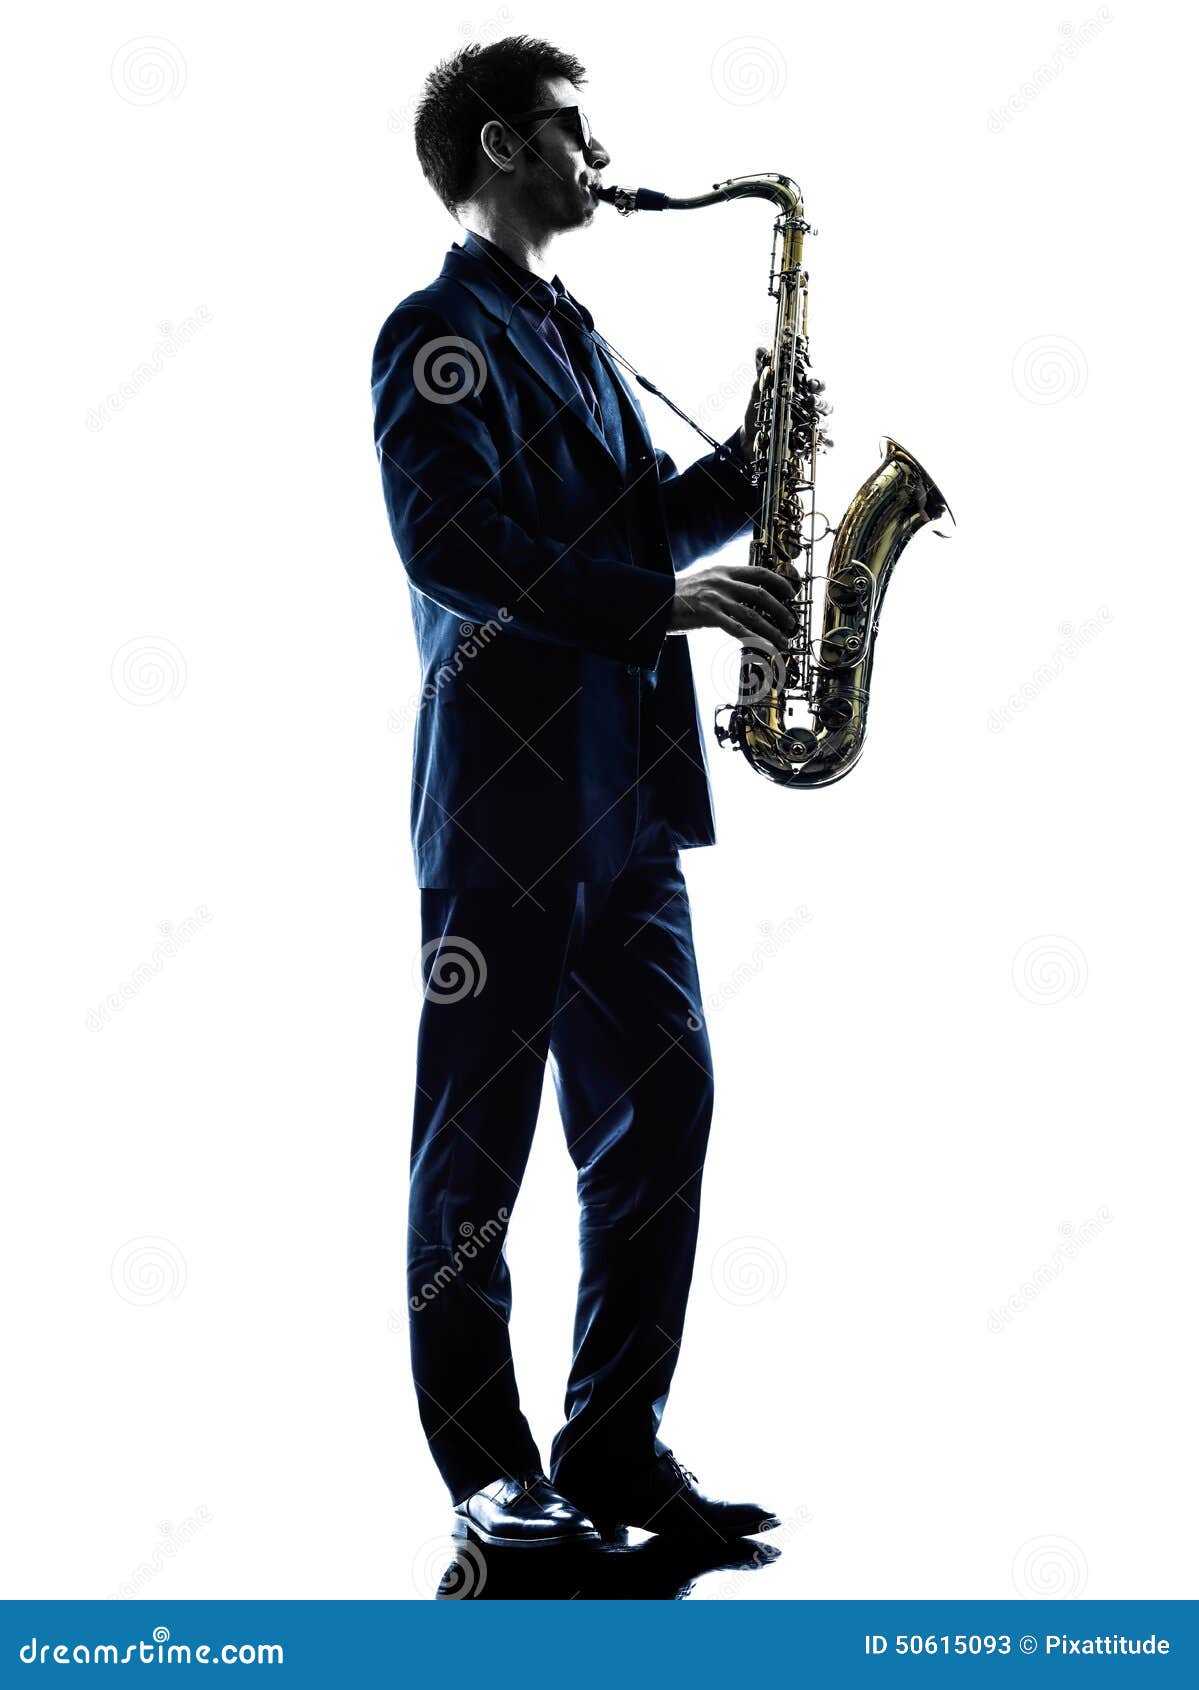 Black and white saxophone stock vector. Illustration of 